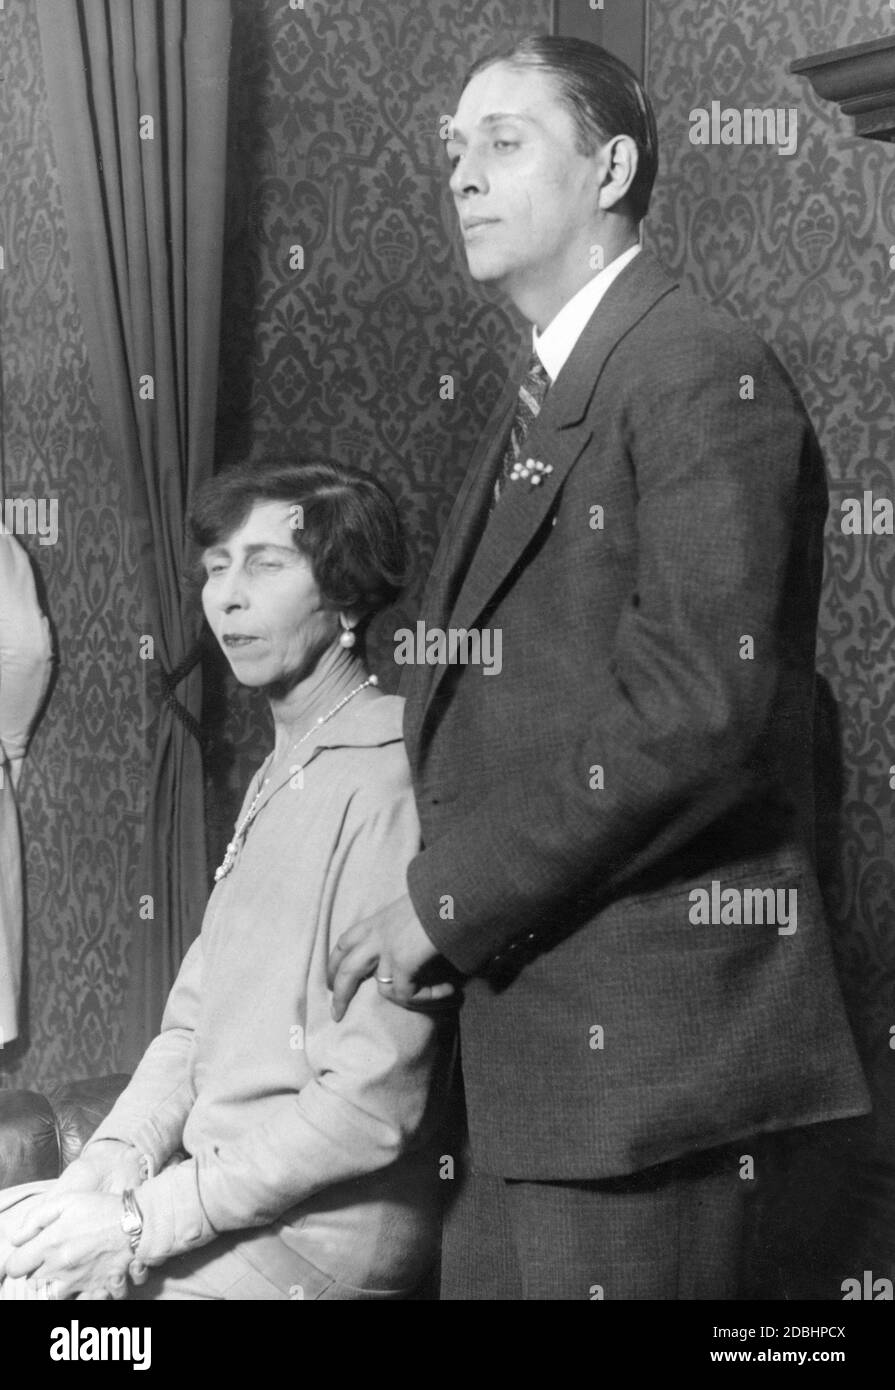 The Zoubkoff couple in Berlin in 1927. Alexander Zoubkoff was a Russian emigrant who was married for a few months to Viktoria (born of Prussia, sister of Wilhelm II and in his first marriage the wife of Adolf of Schaumburg-Lippe). The age difference between the two was over 30 years. Stock Photo